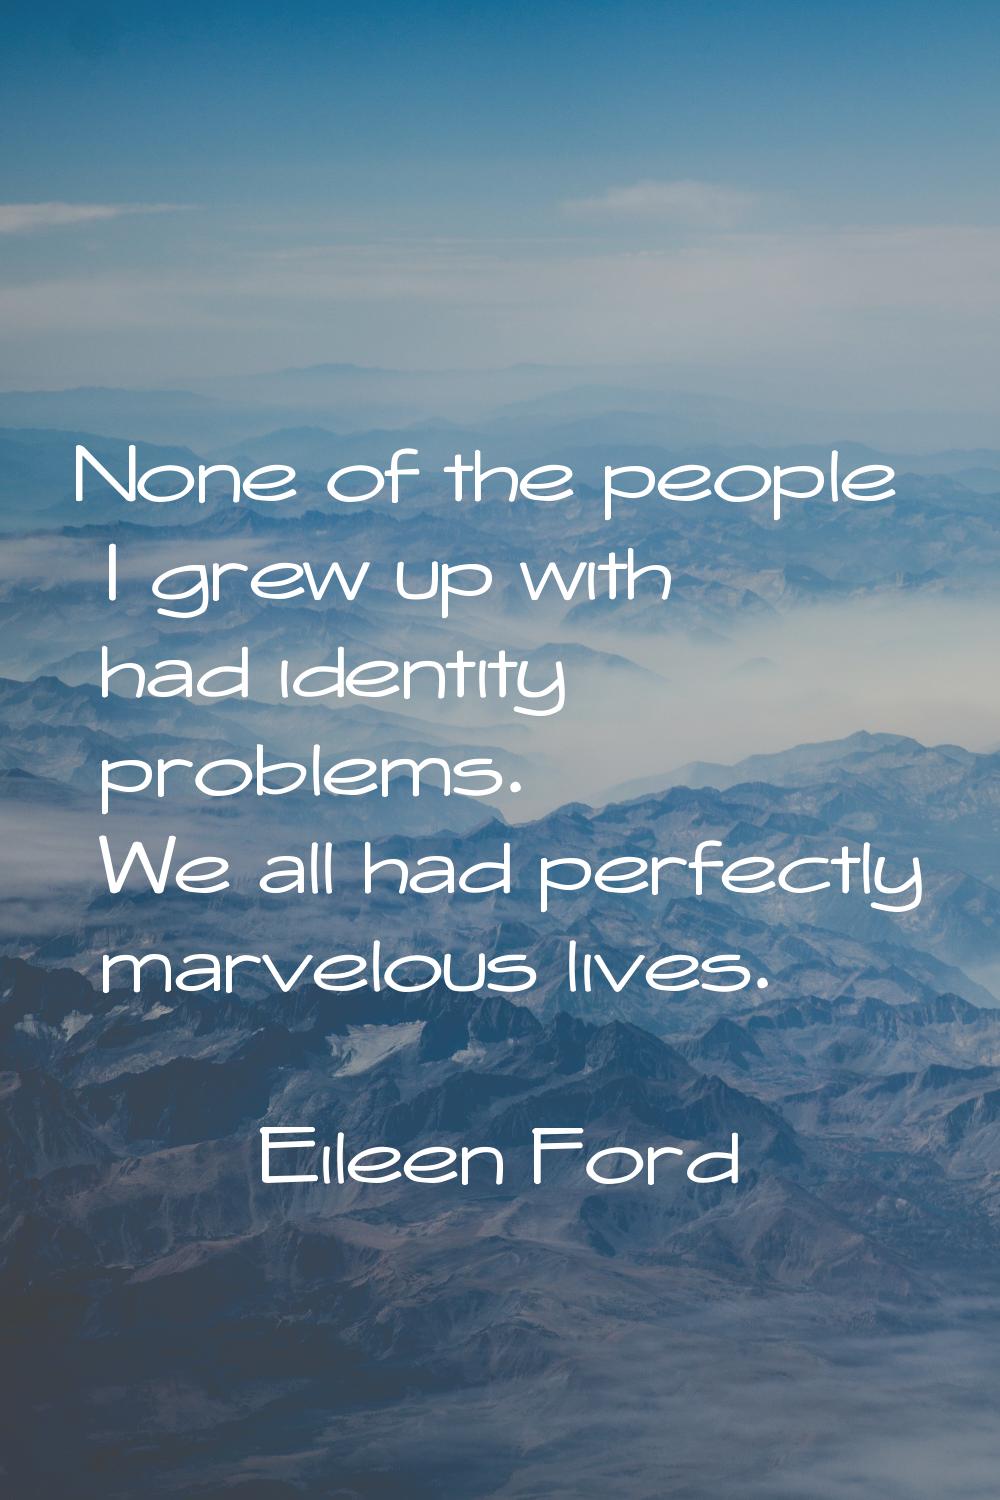 None of the people I grew up with had identity problems. We all had perfectly marvelous lives.